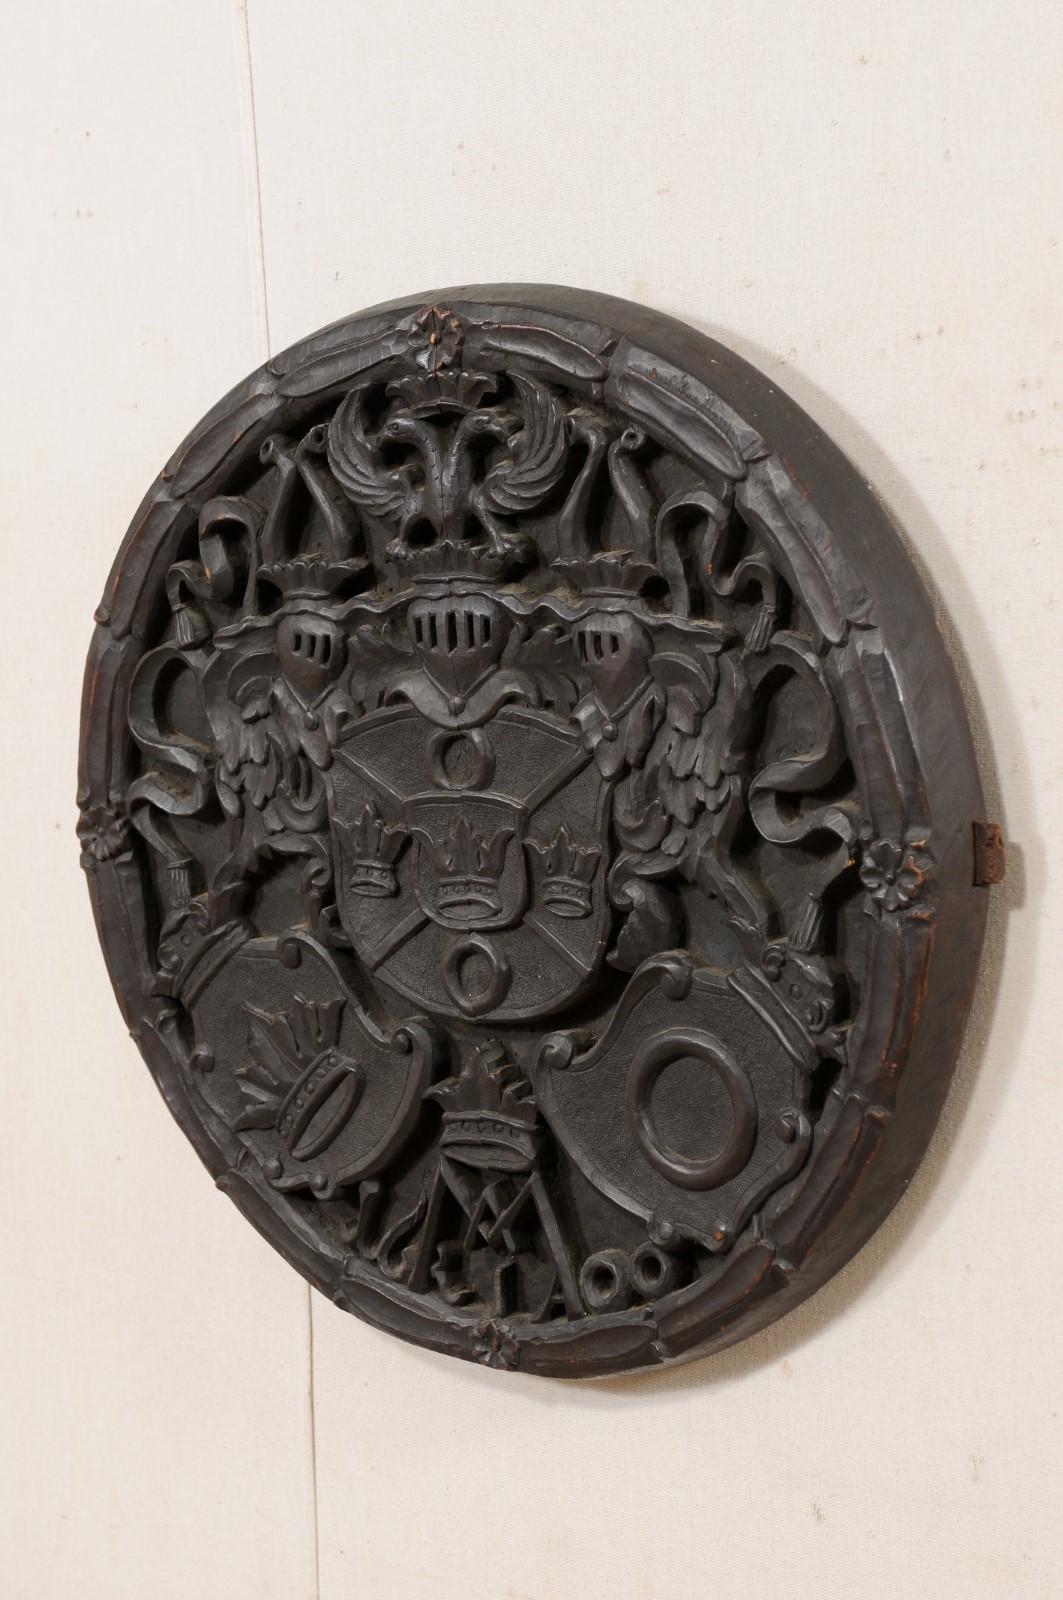 19th Century Antique English Round Wall Plaque Carved in Knights, Shield & Crown Motif  For Sale